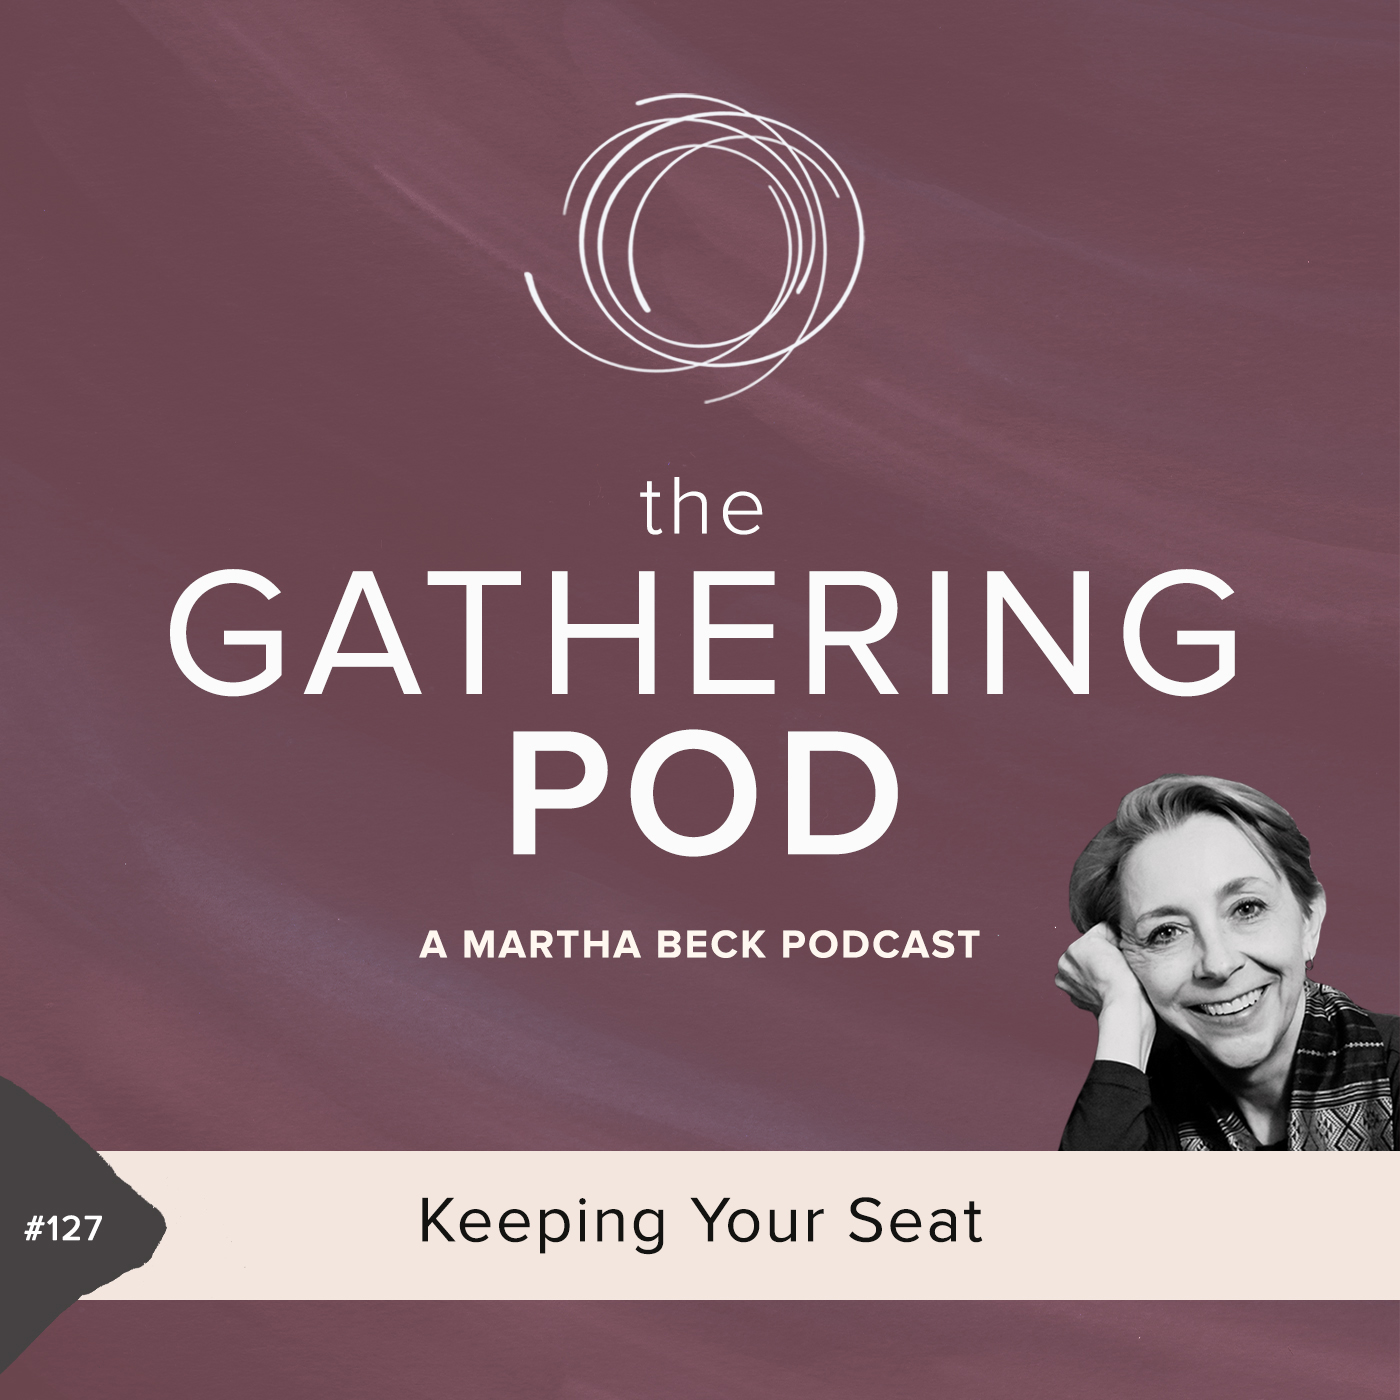 Image for The Gathering Pod A Martha Beck Podcast Episode #127 Keeping Your Seat